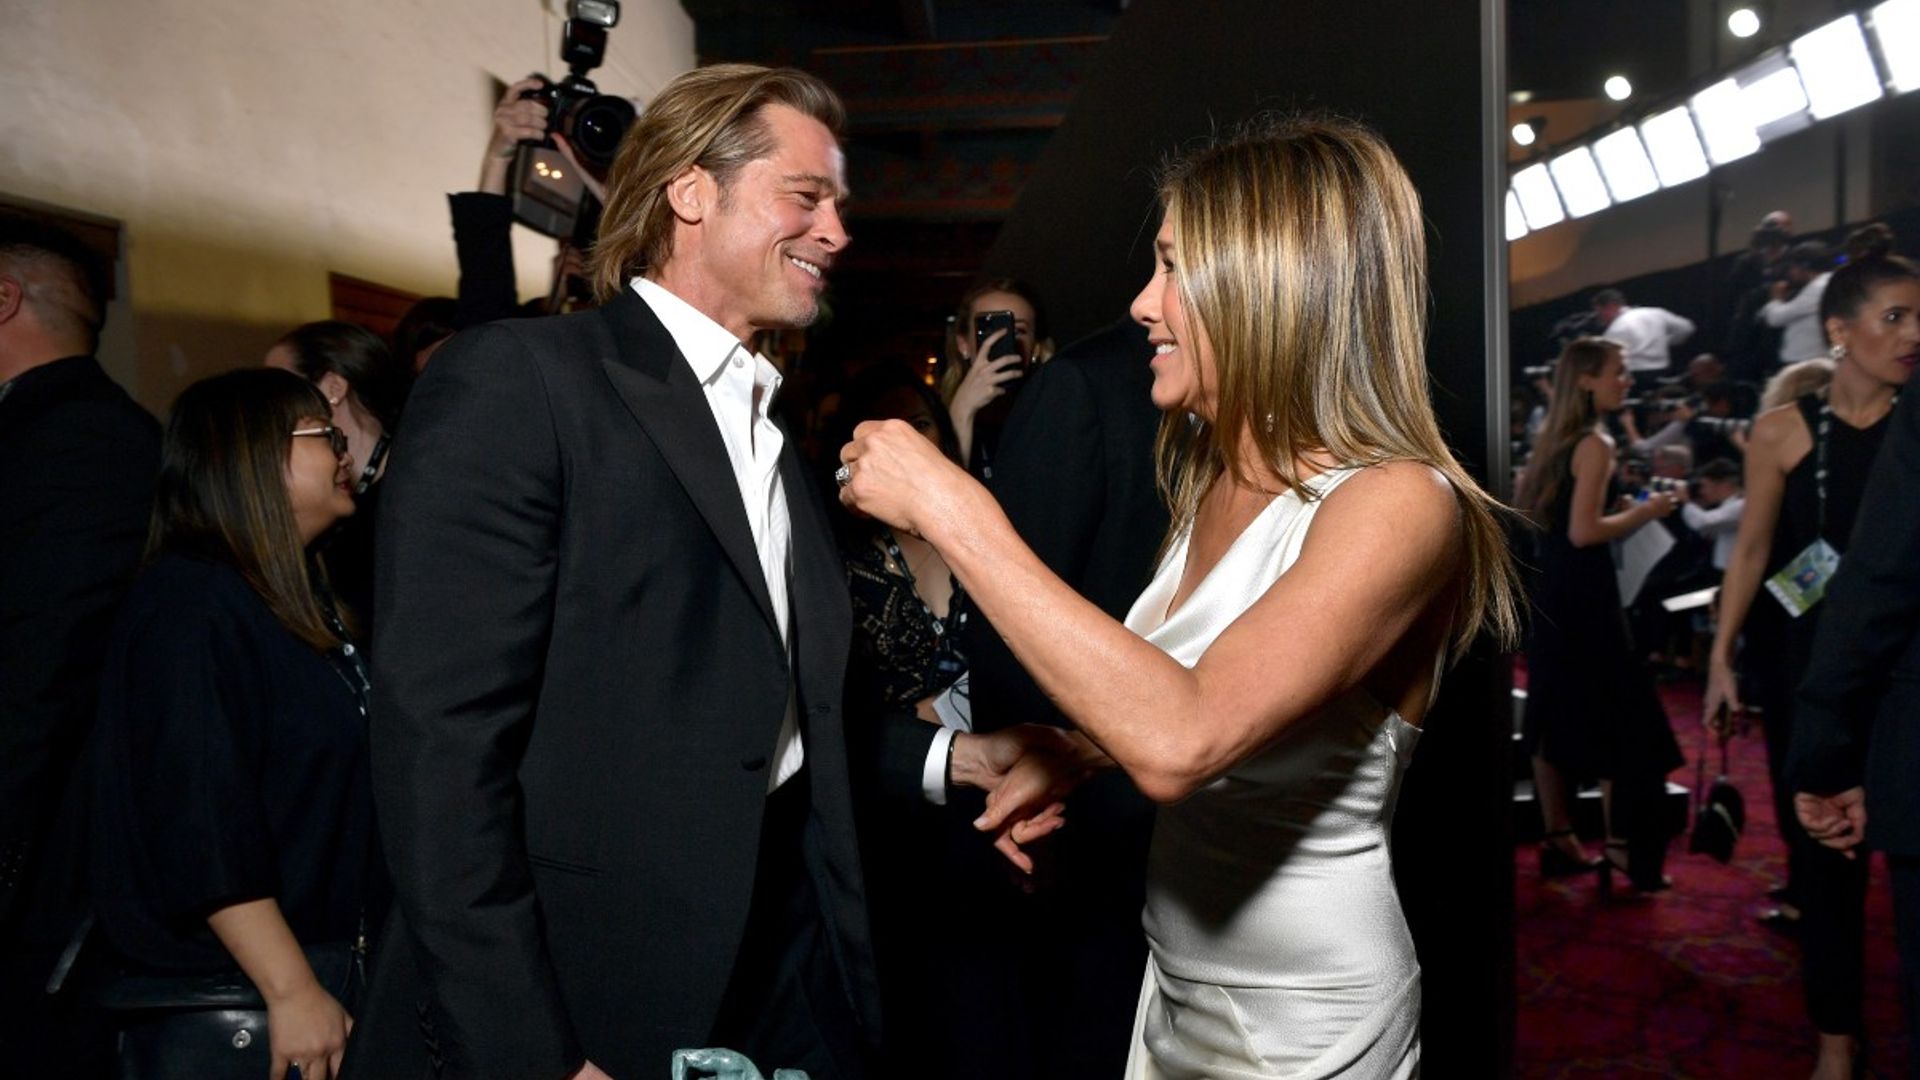 What really happened when Jennifer Aniston and Brad Pitt met at the SAG Awards